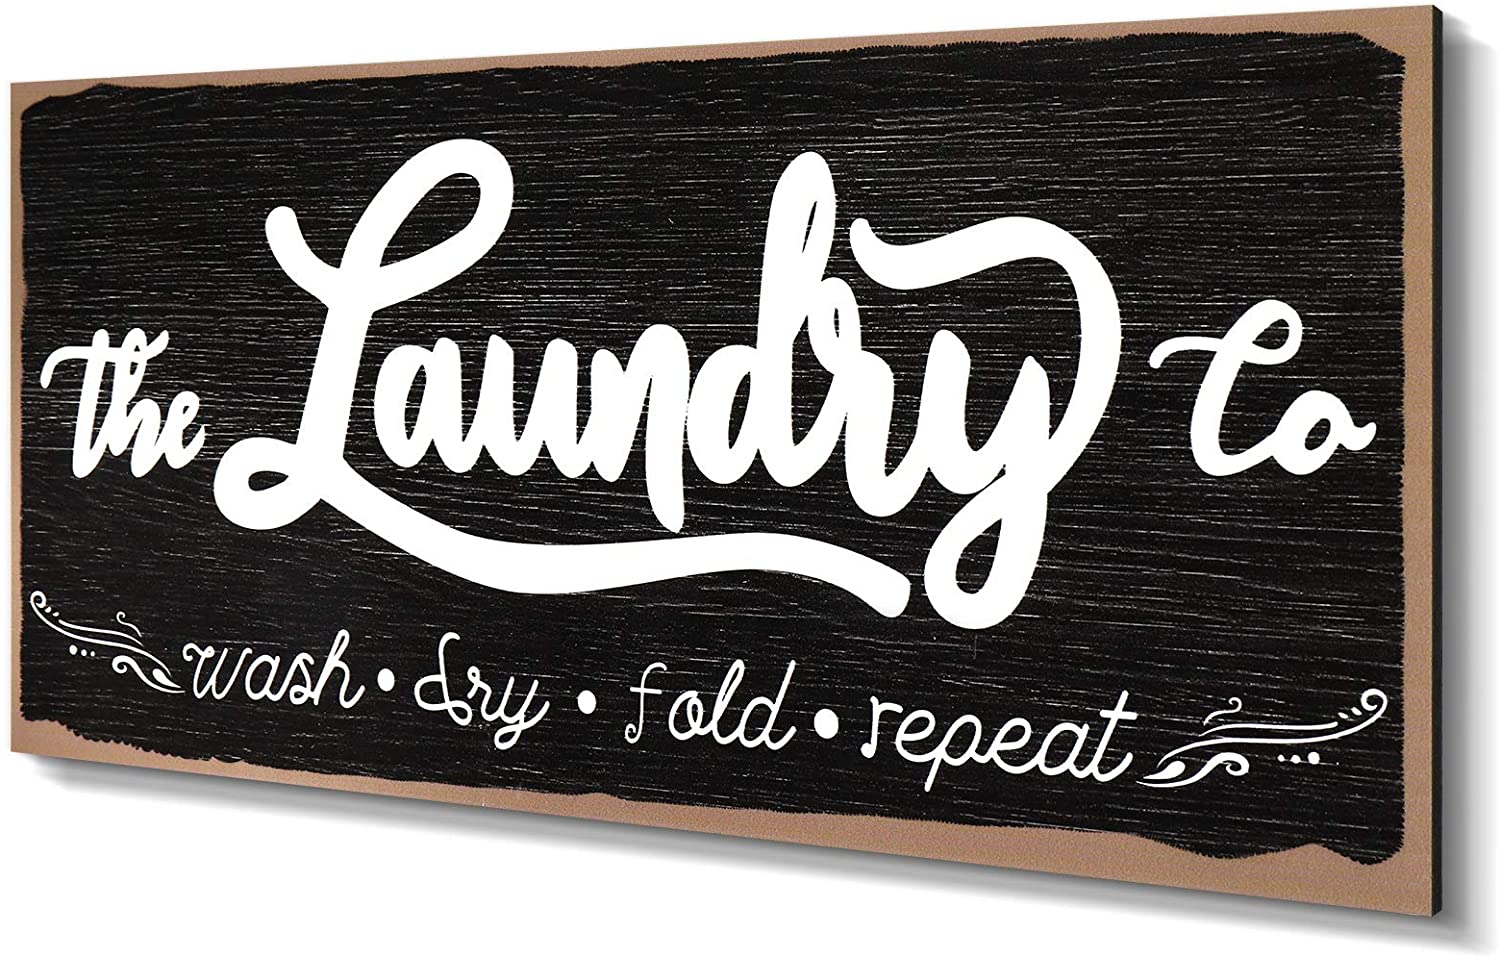 Laundry Room Sign Wooden Rustic Farmhouse Laundry Sign Wash Dry Fold Repeat Wall Decor Vintage Laundry Sign Printed Hanging Sign for Home Laundry Room Decoration, 16 x 7 Inches